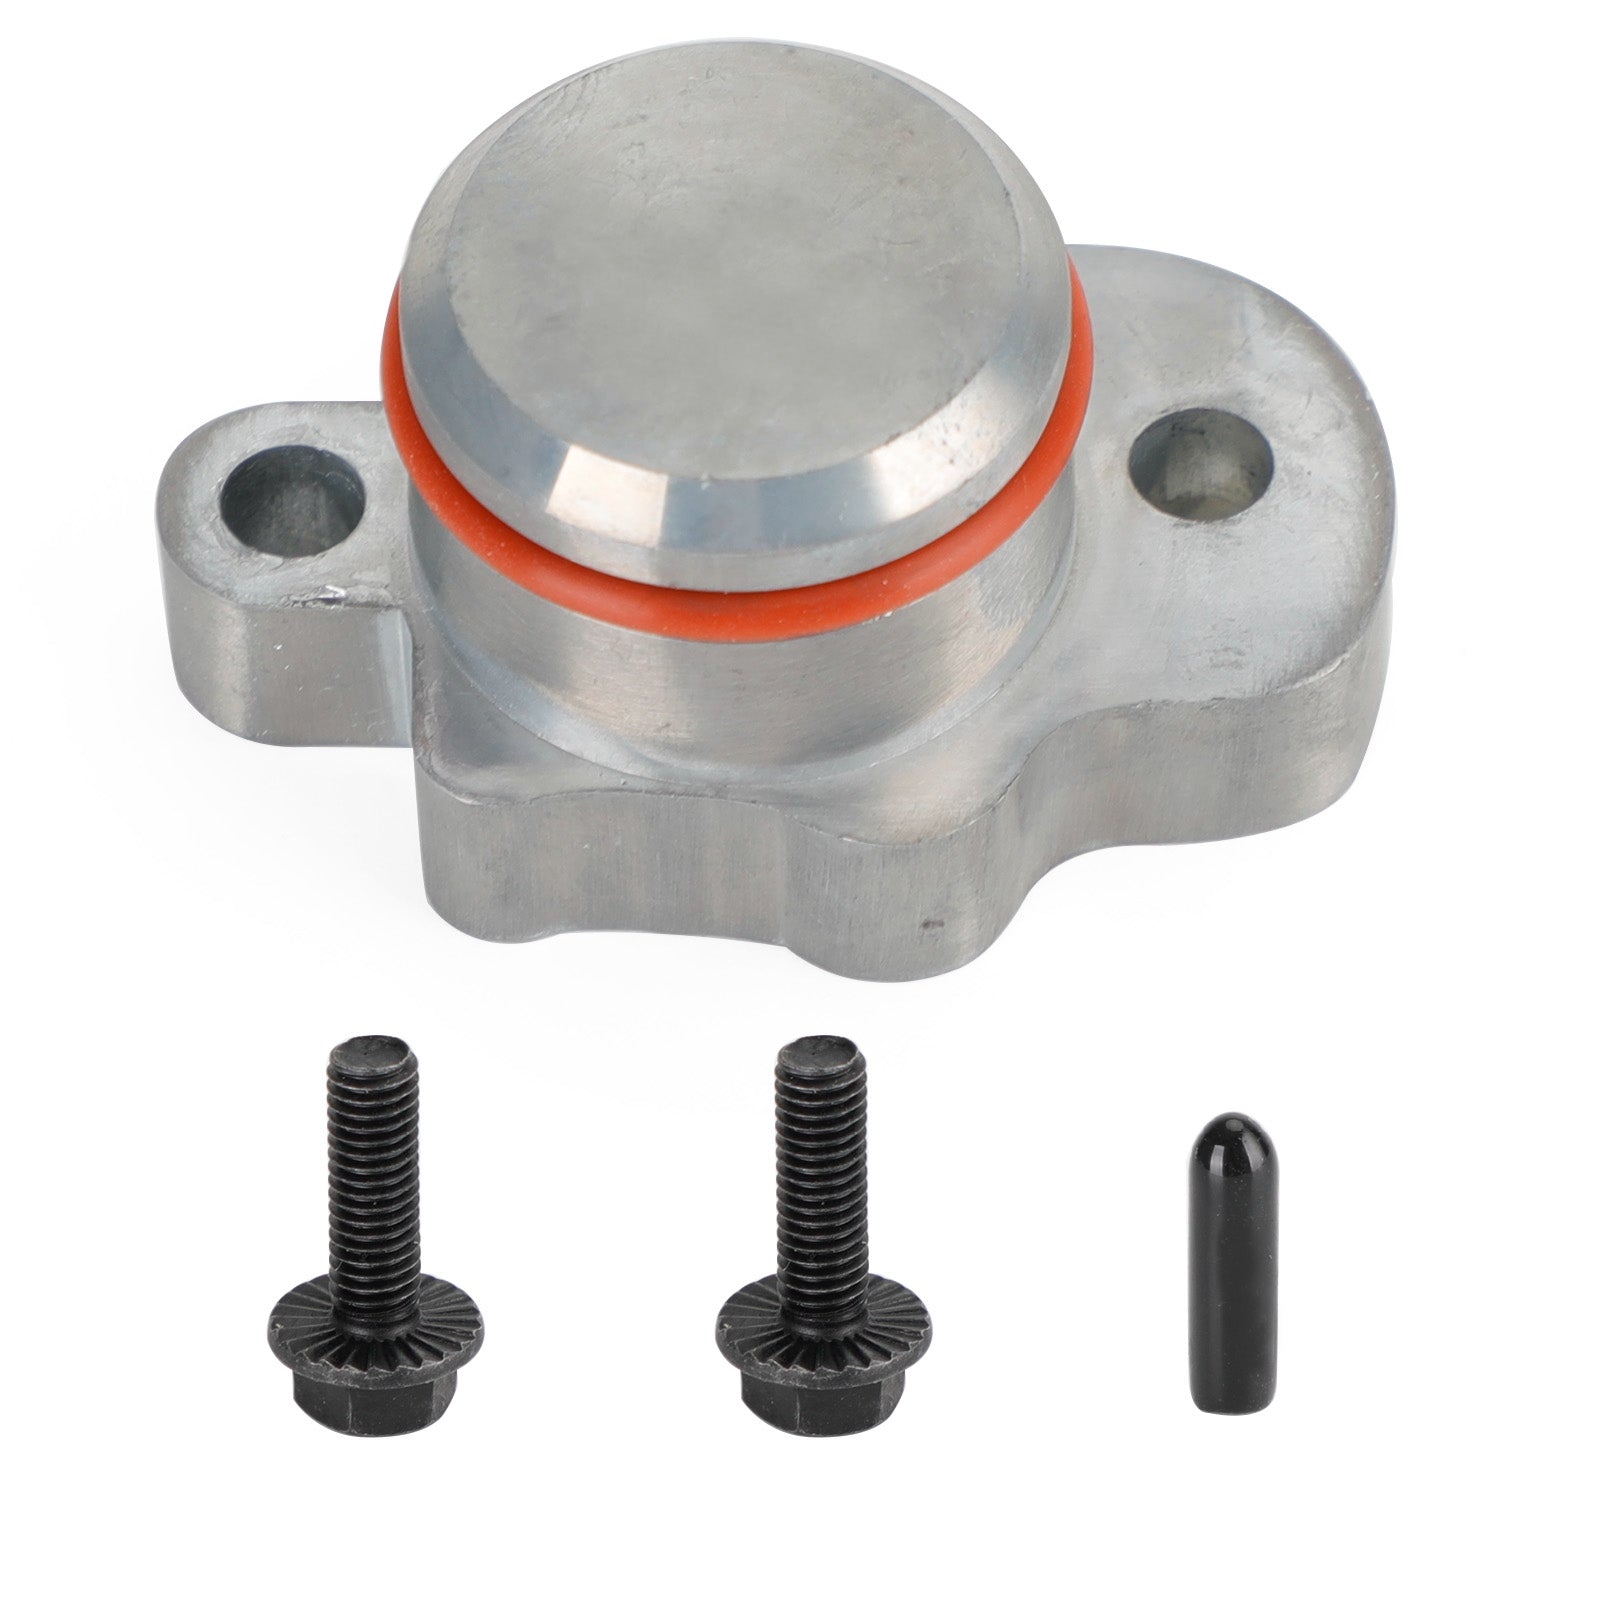 Oil Injection Block Off Plug Fits All BW80 PW50 Models